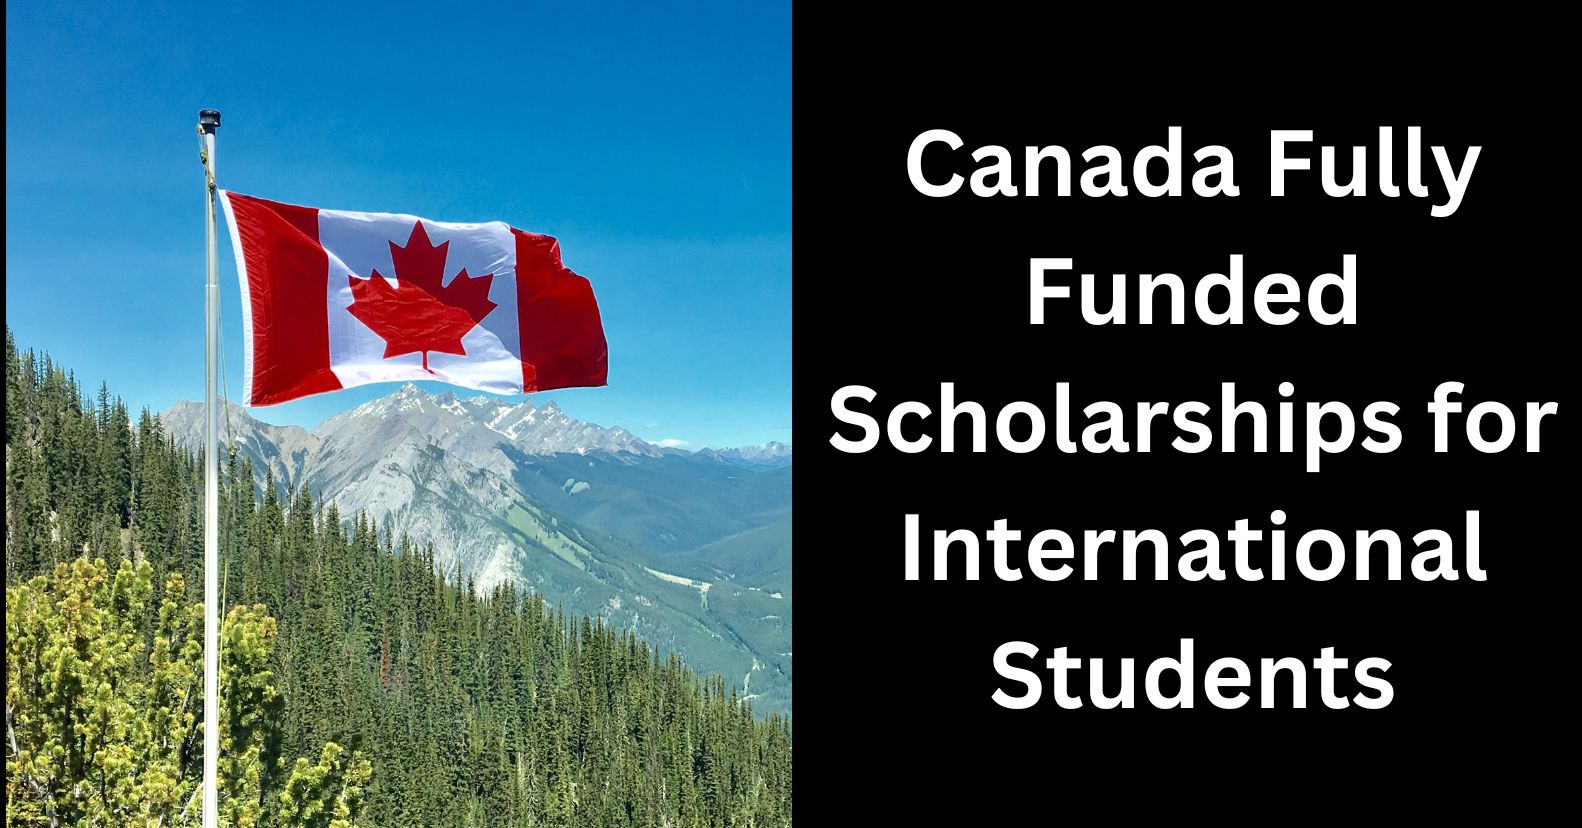 Canada Fully Funded Scholarships for International Students